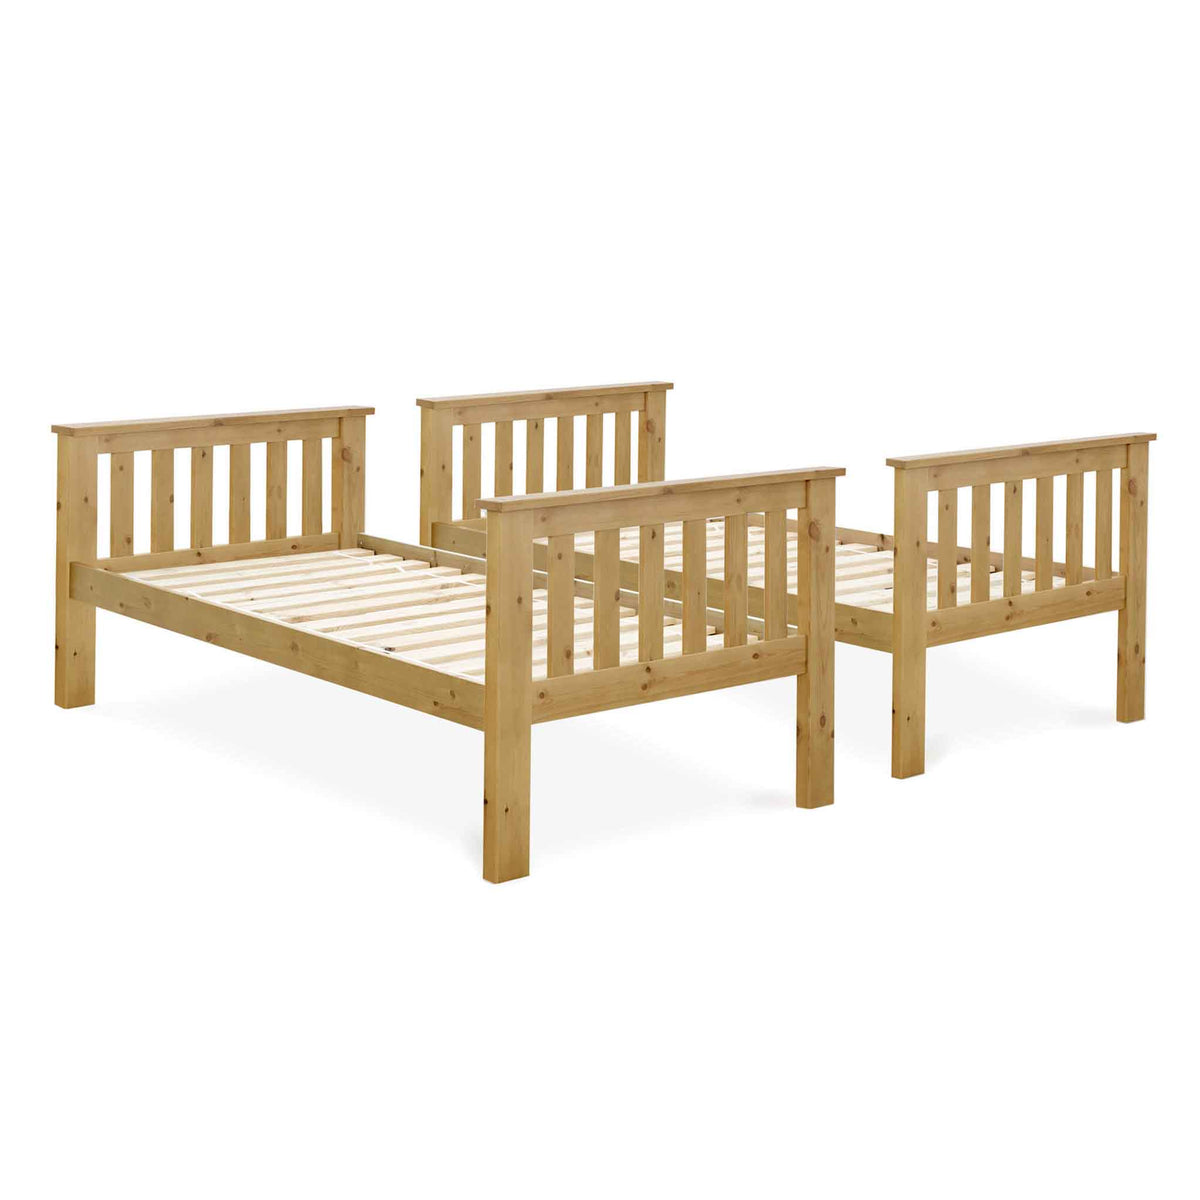 pair of single beds from the Carlson Pine Detachable Single Bunk Beds from Roseland Furniture